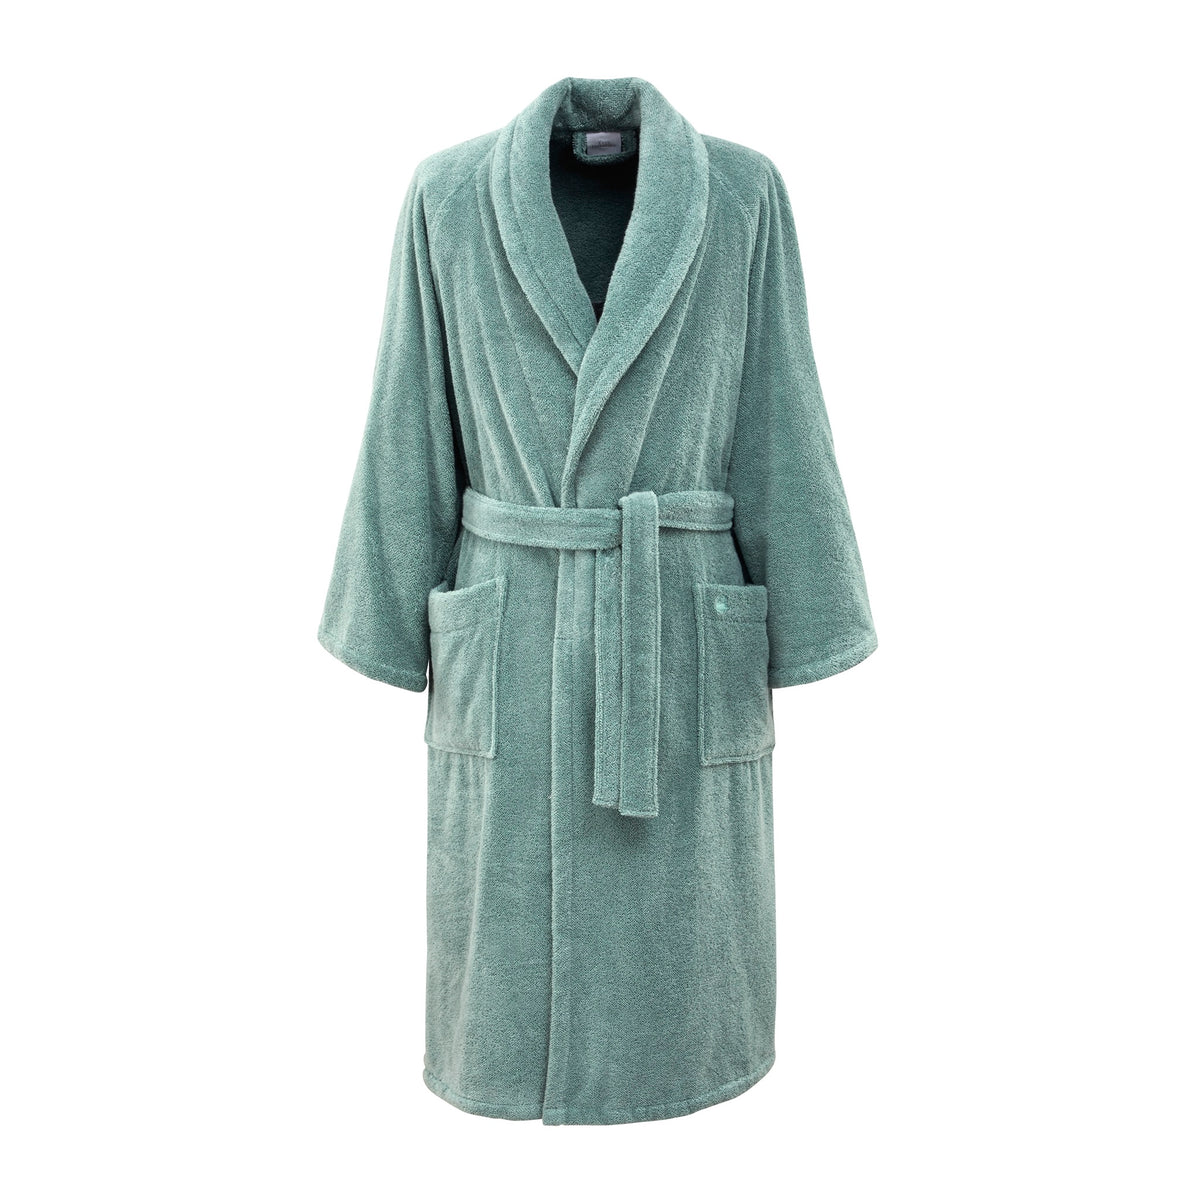 Front View of Yves Delorme Etoile Bath Robe in Color Fjord